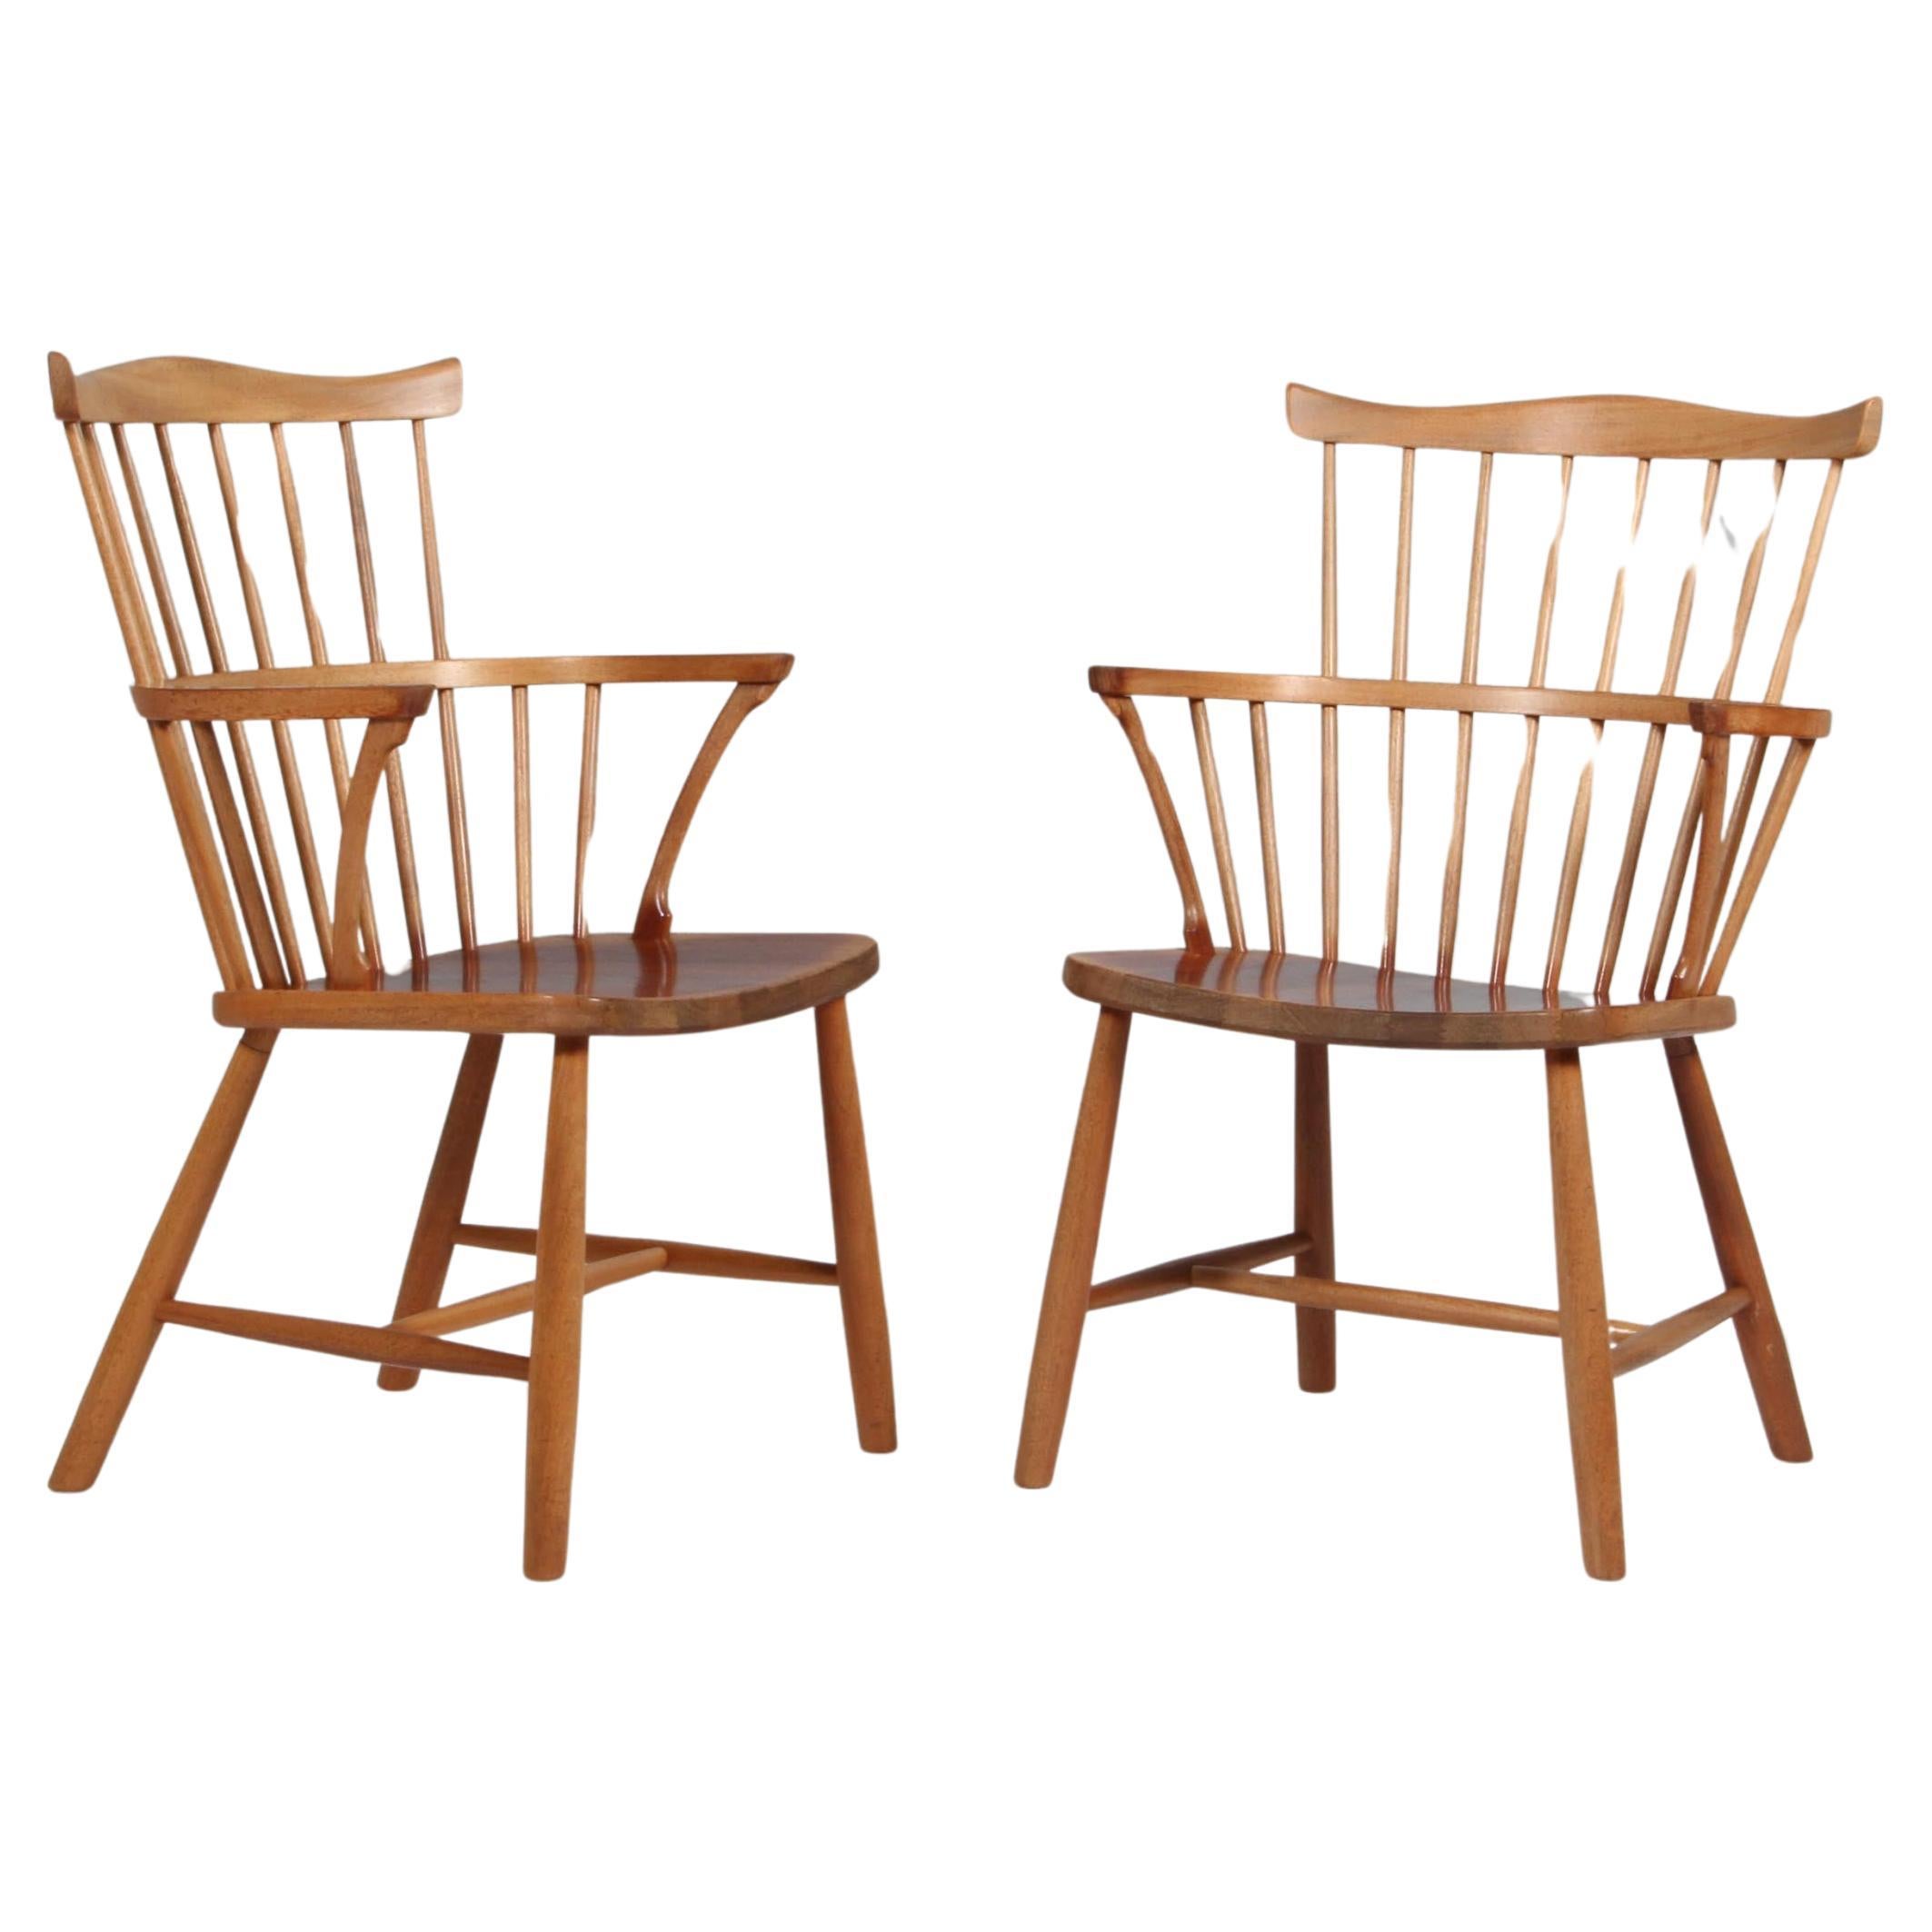 Børge Mogensen Windsor armchairs in mahogany, 1st editions